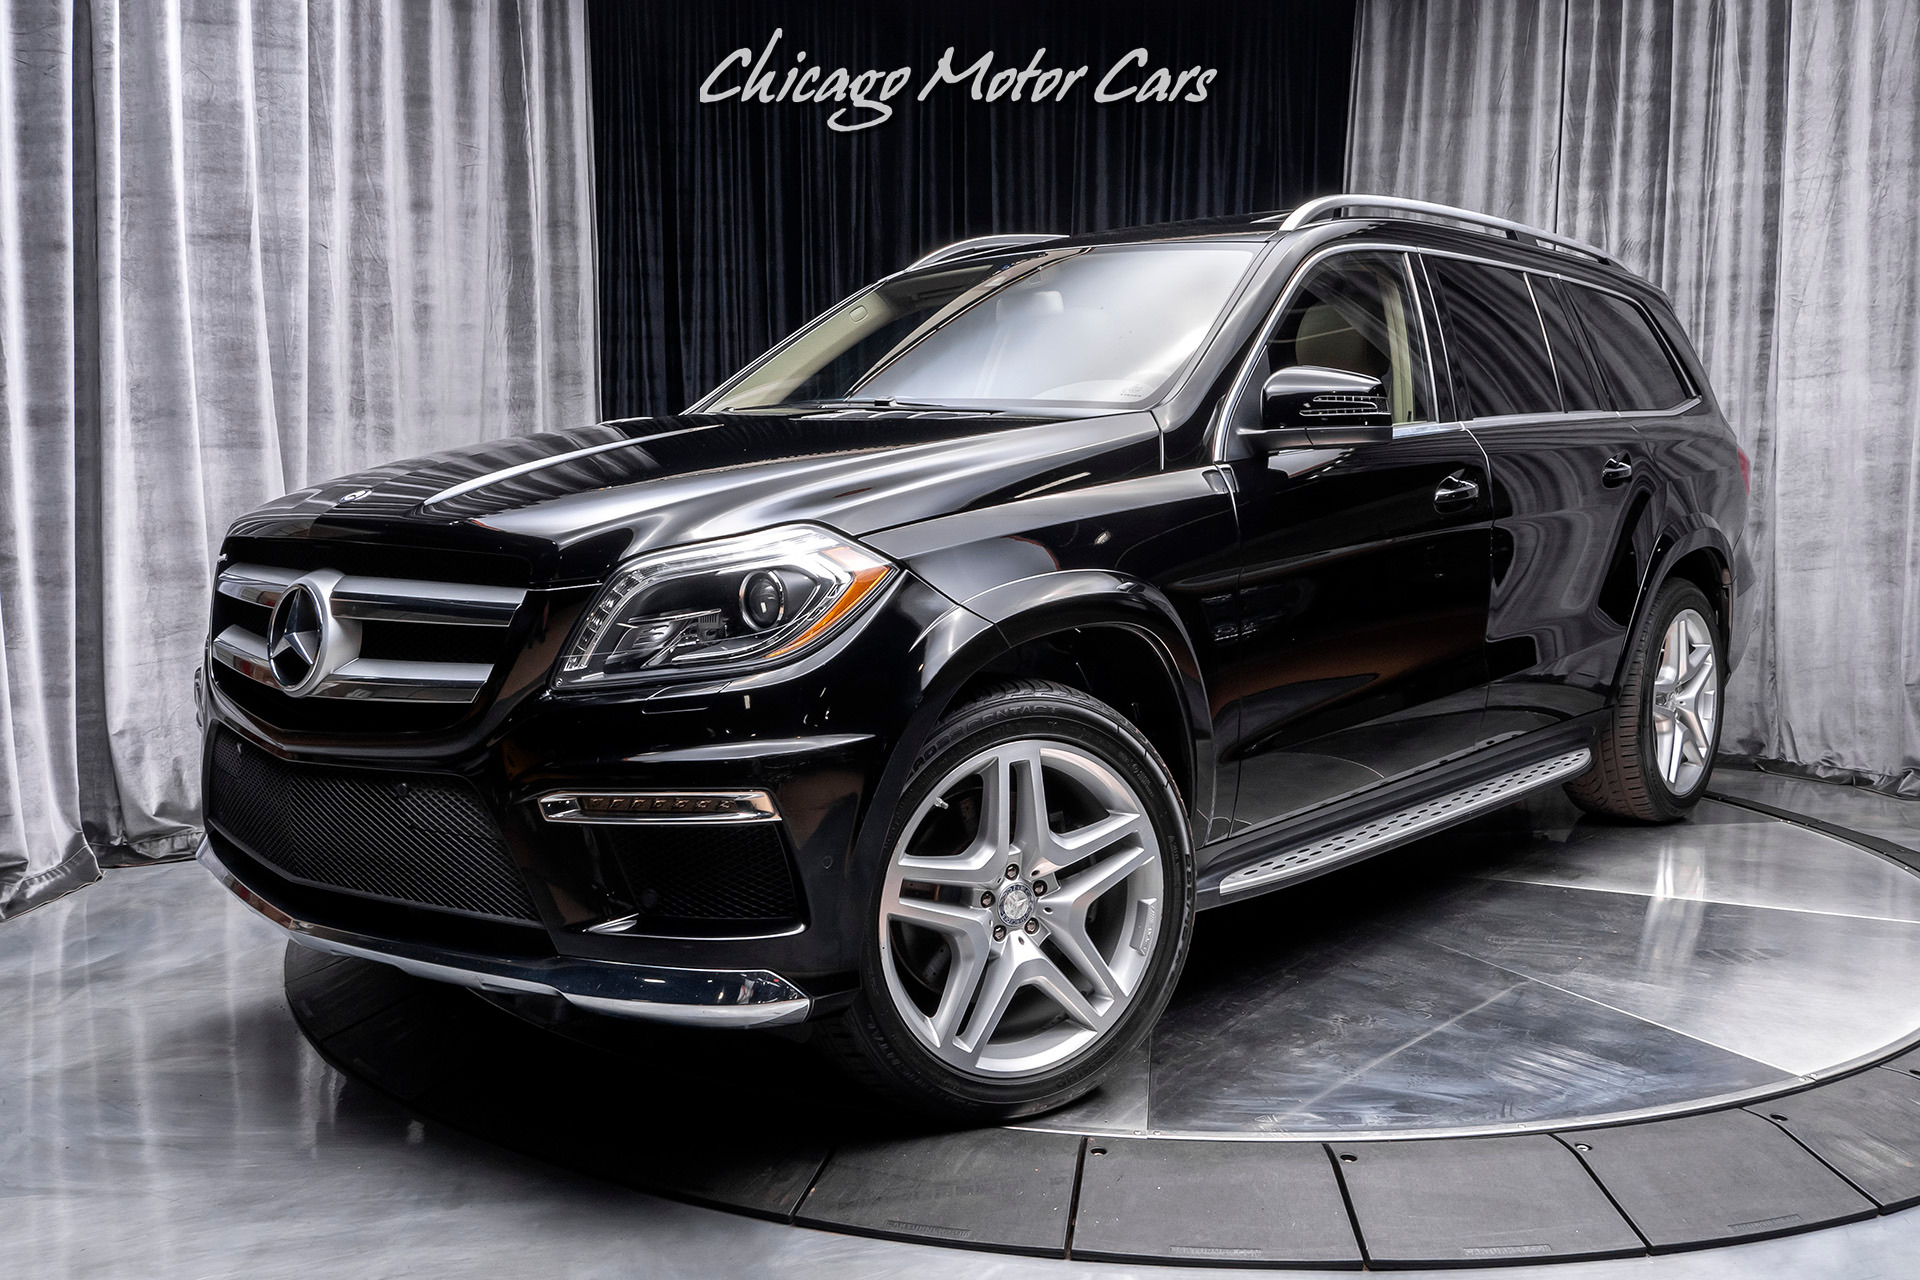 Used 2013 Mercedes-Benz GL550 4MATIC SUV MSRP $88K+ For Sale